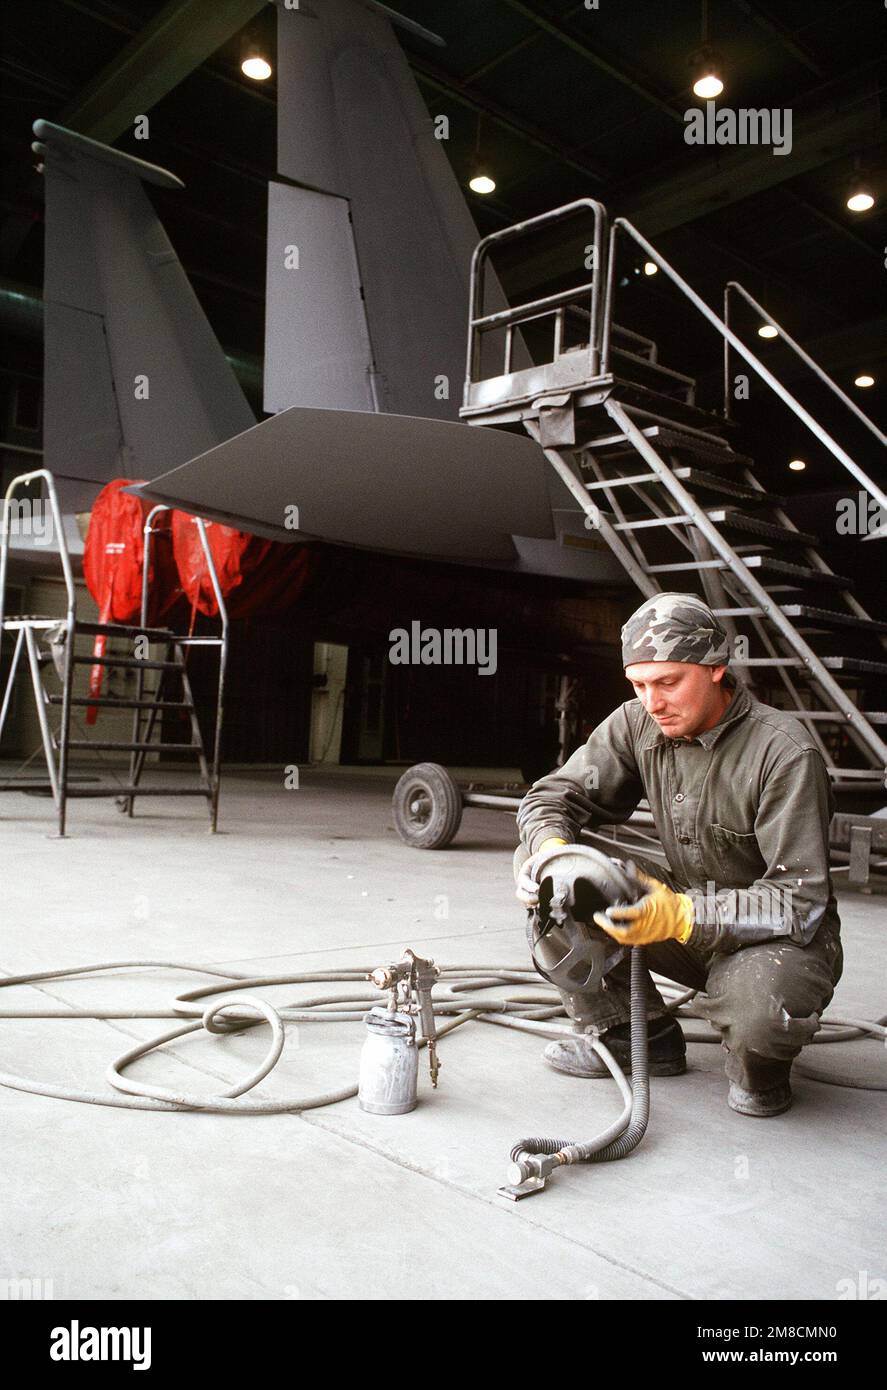 AIRMAN 1ST Class Matthew Sumrell checks a spray gun prior to painting an F-15 Eagle aircraft. The plane is one of 12 to be sold to the Saudi Arabian Air Force for use during Operation Desert Shield. Subject Operation/Series: DESERT SHIELD Base: Bitburg Air Base Country: Deutschland / Germany(DEU) Stock Photo